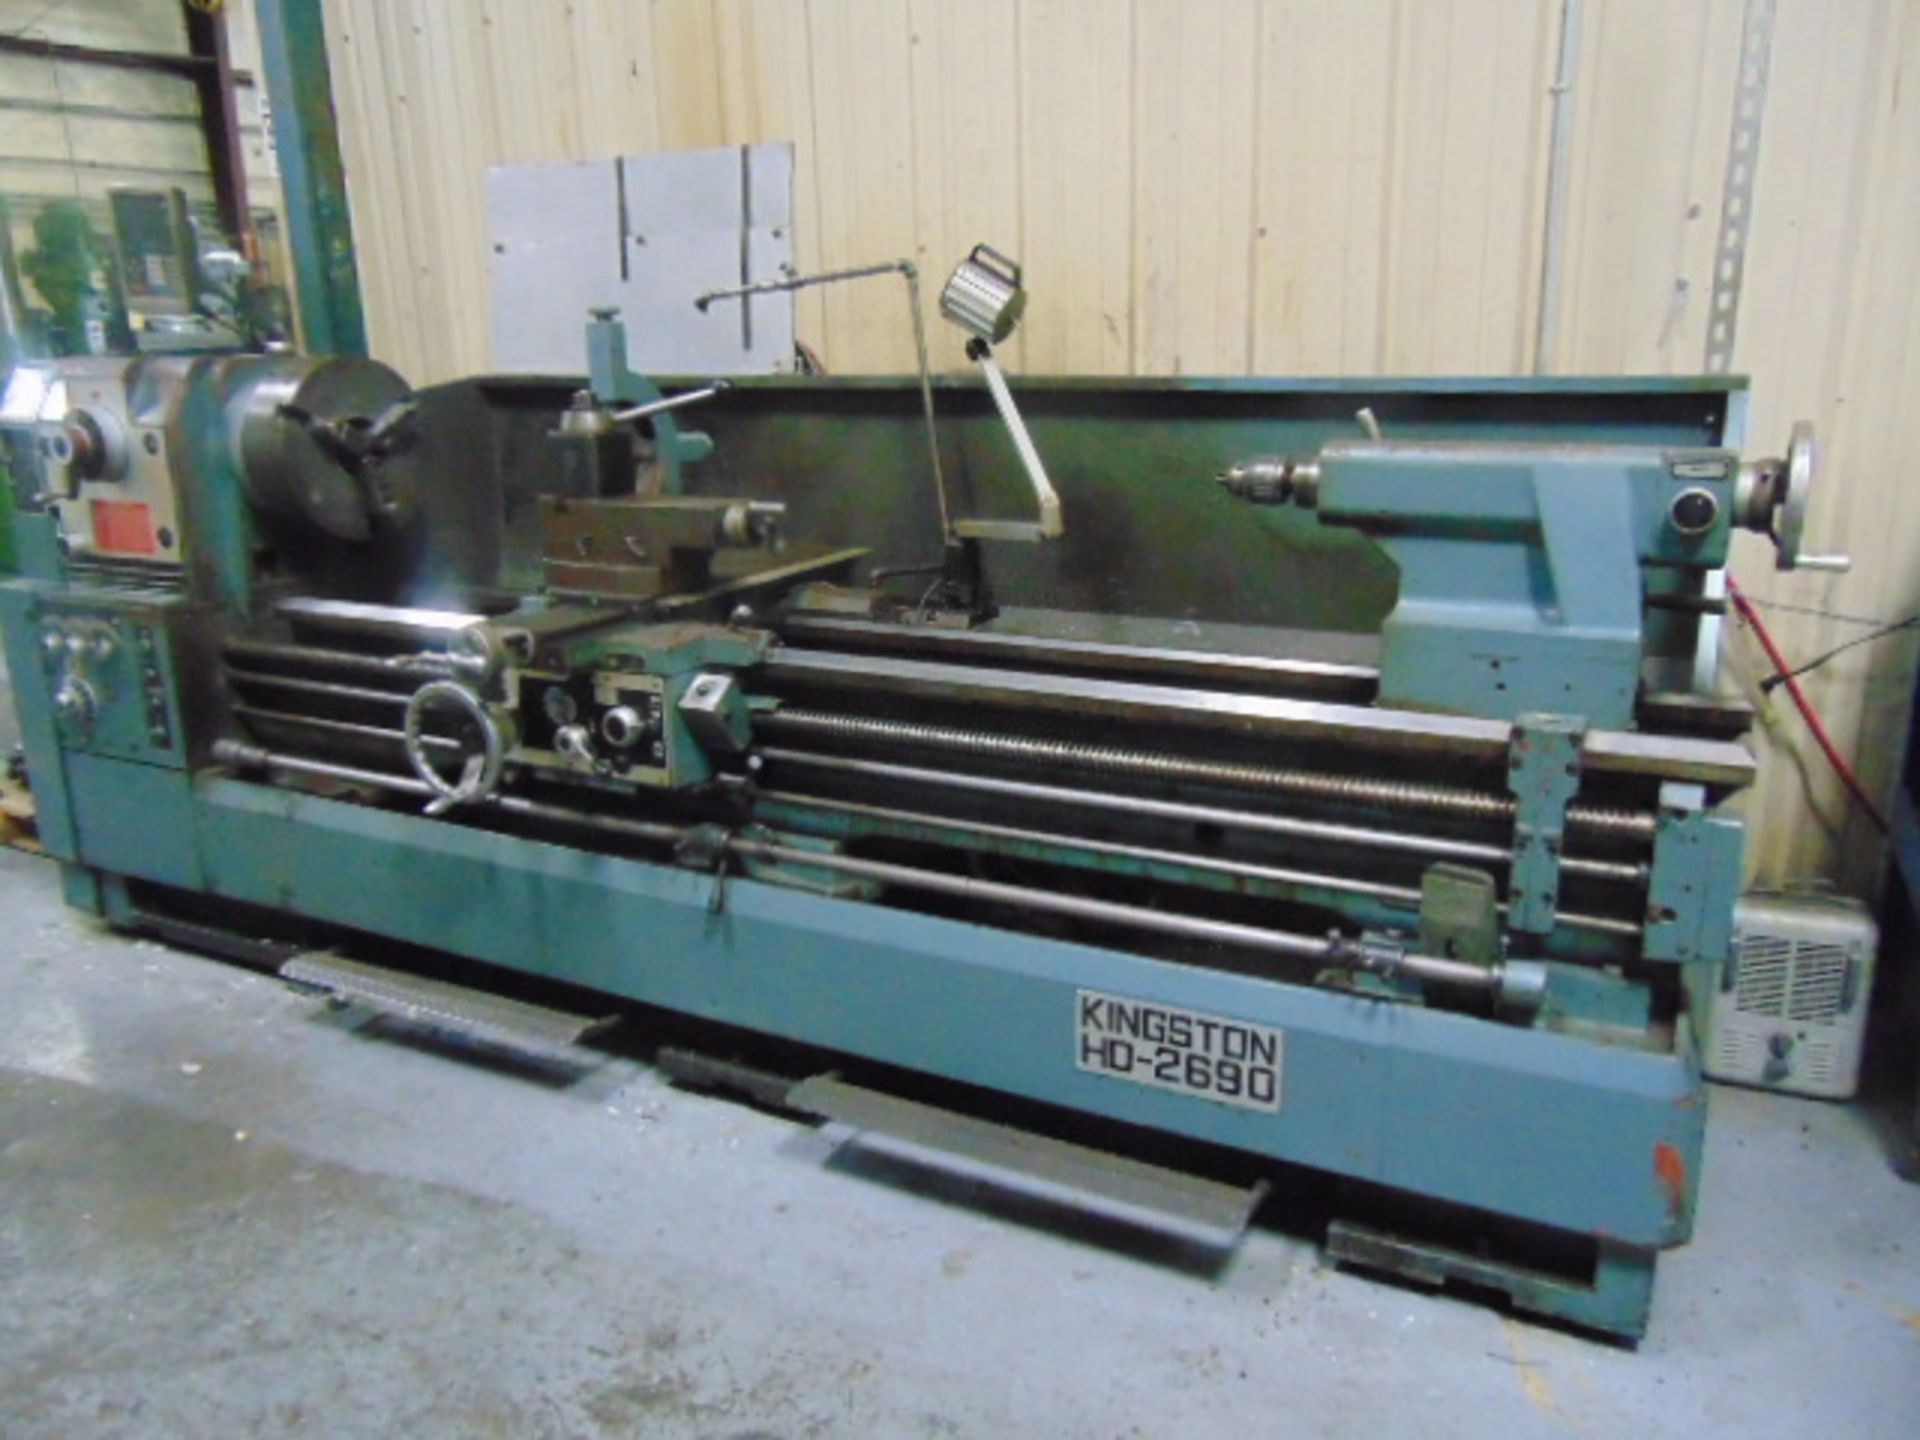 ENGINE LATHE, KINGSTON 26” X 90” MDL. HD2690, new 2006, 15-1/2” dia. 3-jaw chuck, 4-1/4” spdl. bore, - Image 2 of 15